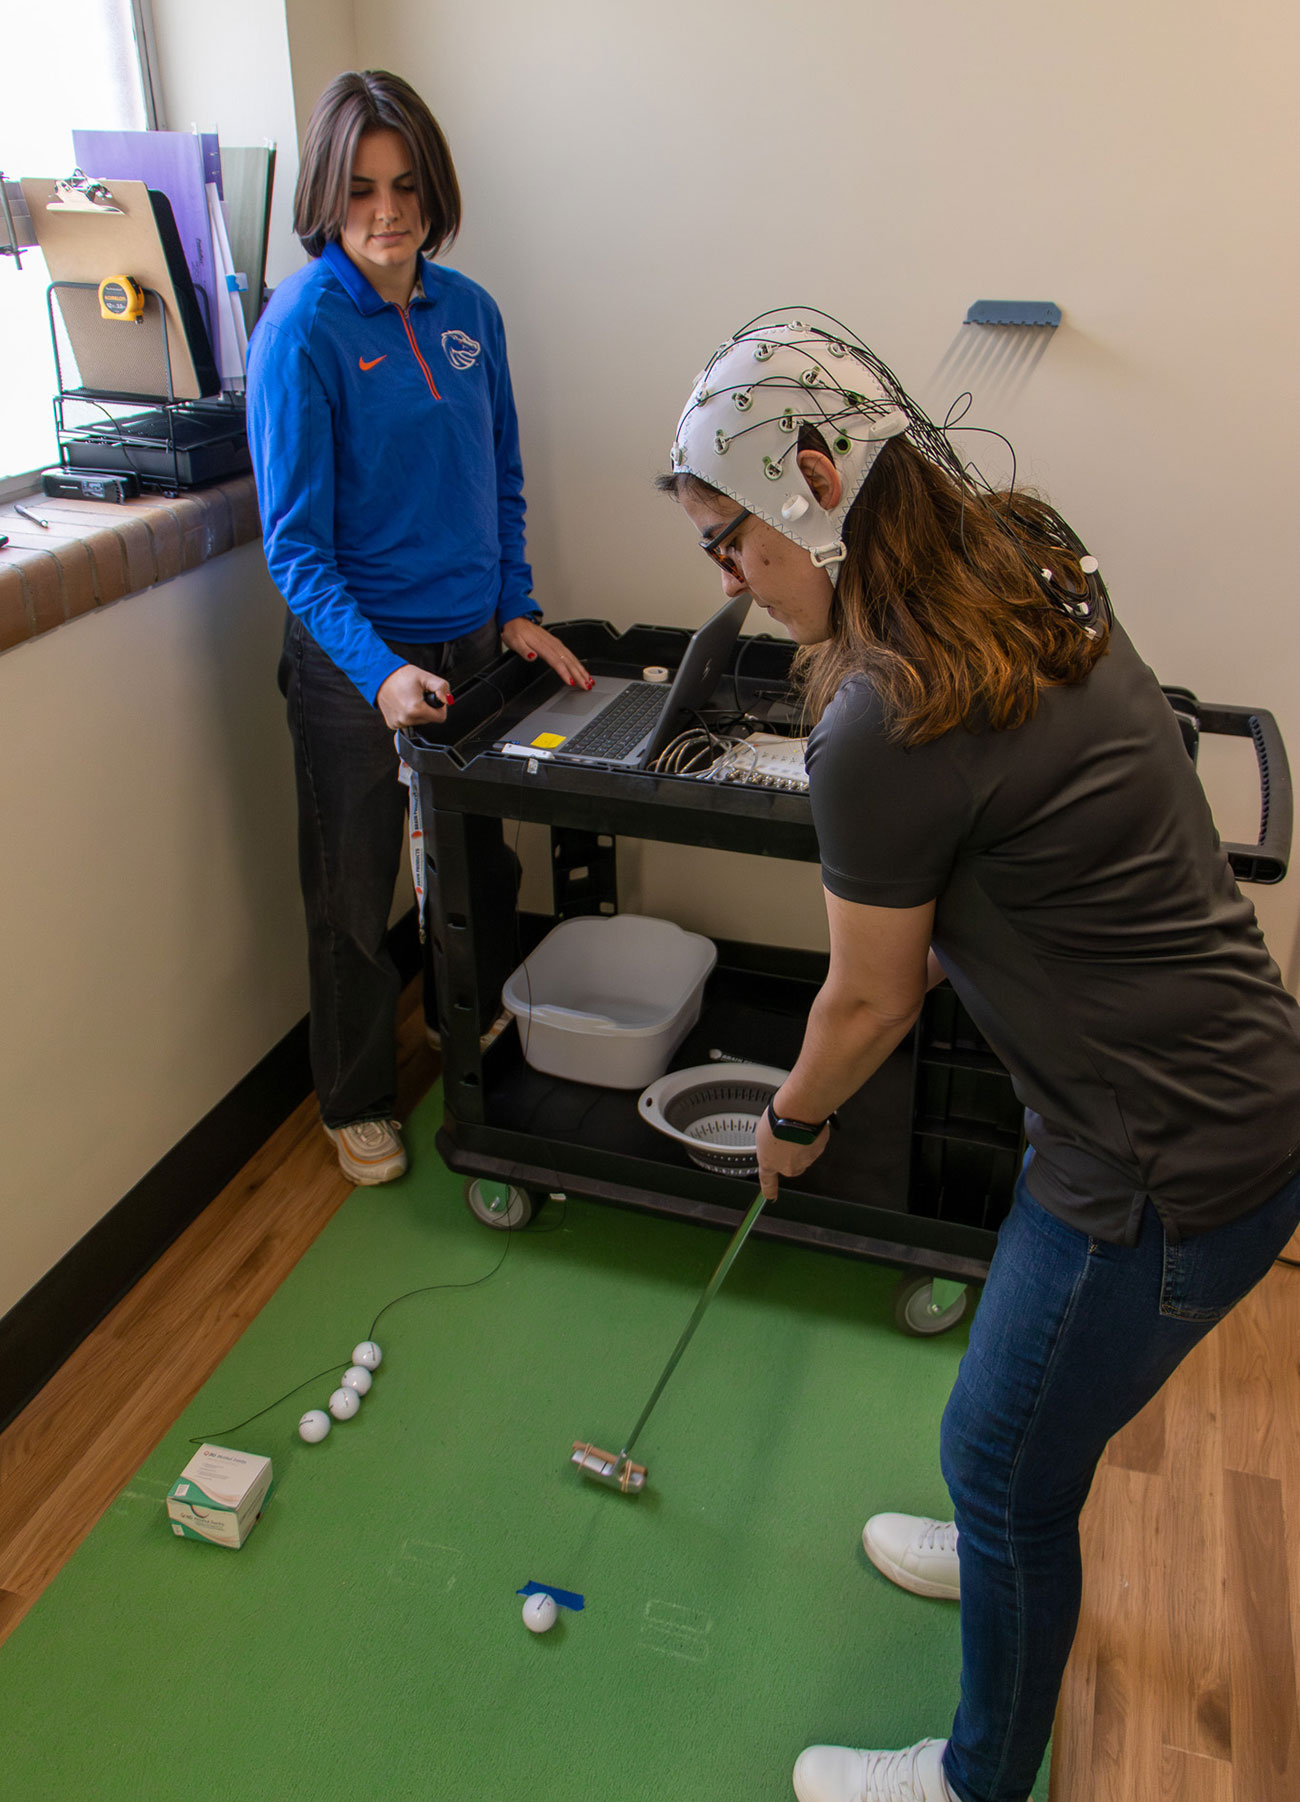 Kinesiology faculty Mariane Bacelar putts a golf ball while wearing an EEG hat, master's student Jet Taylor records the data on a laptop